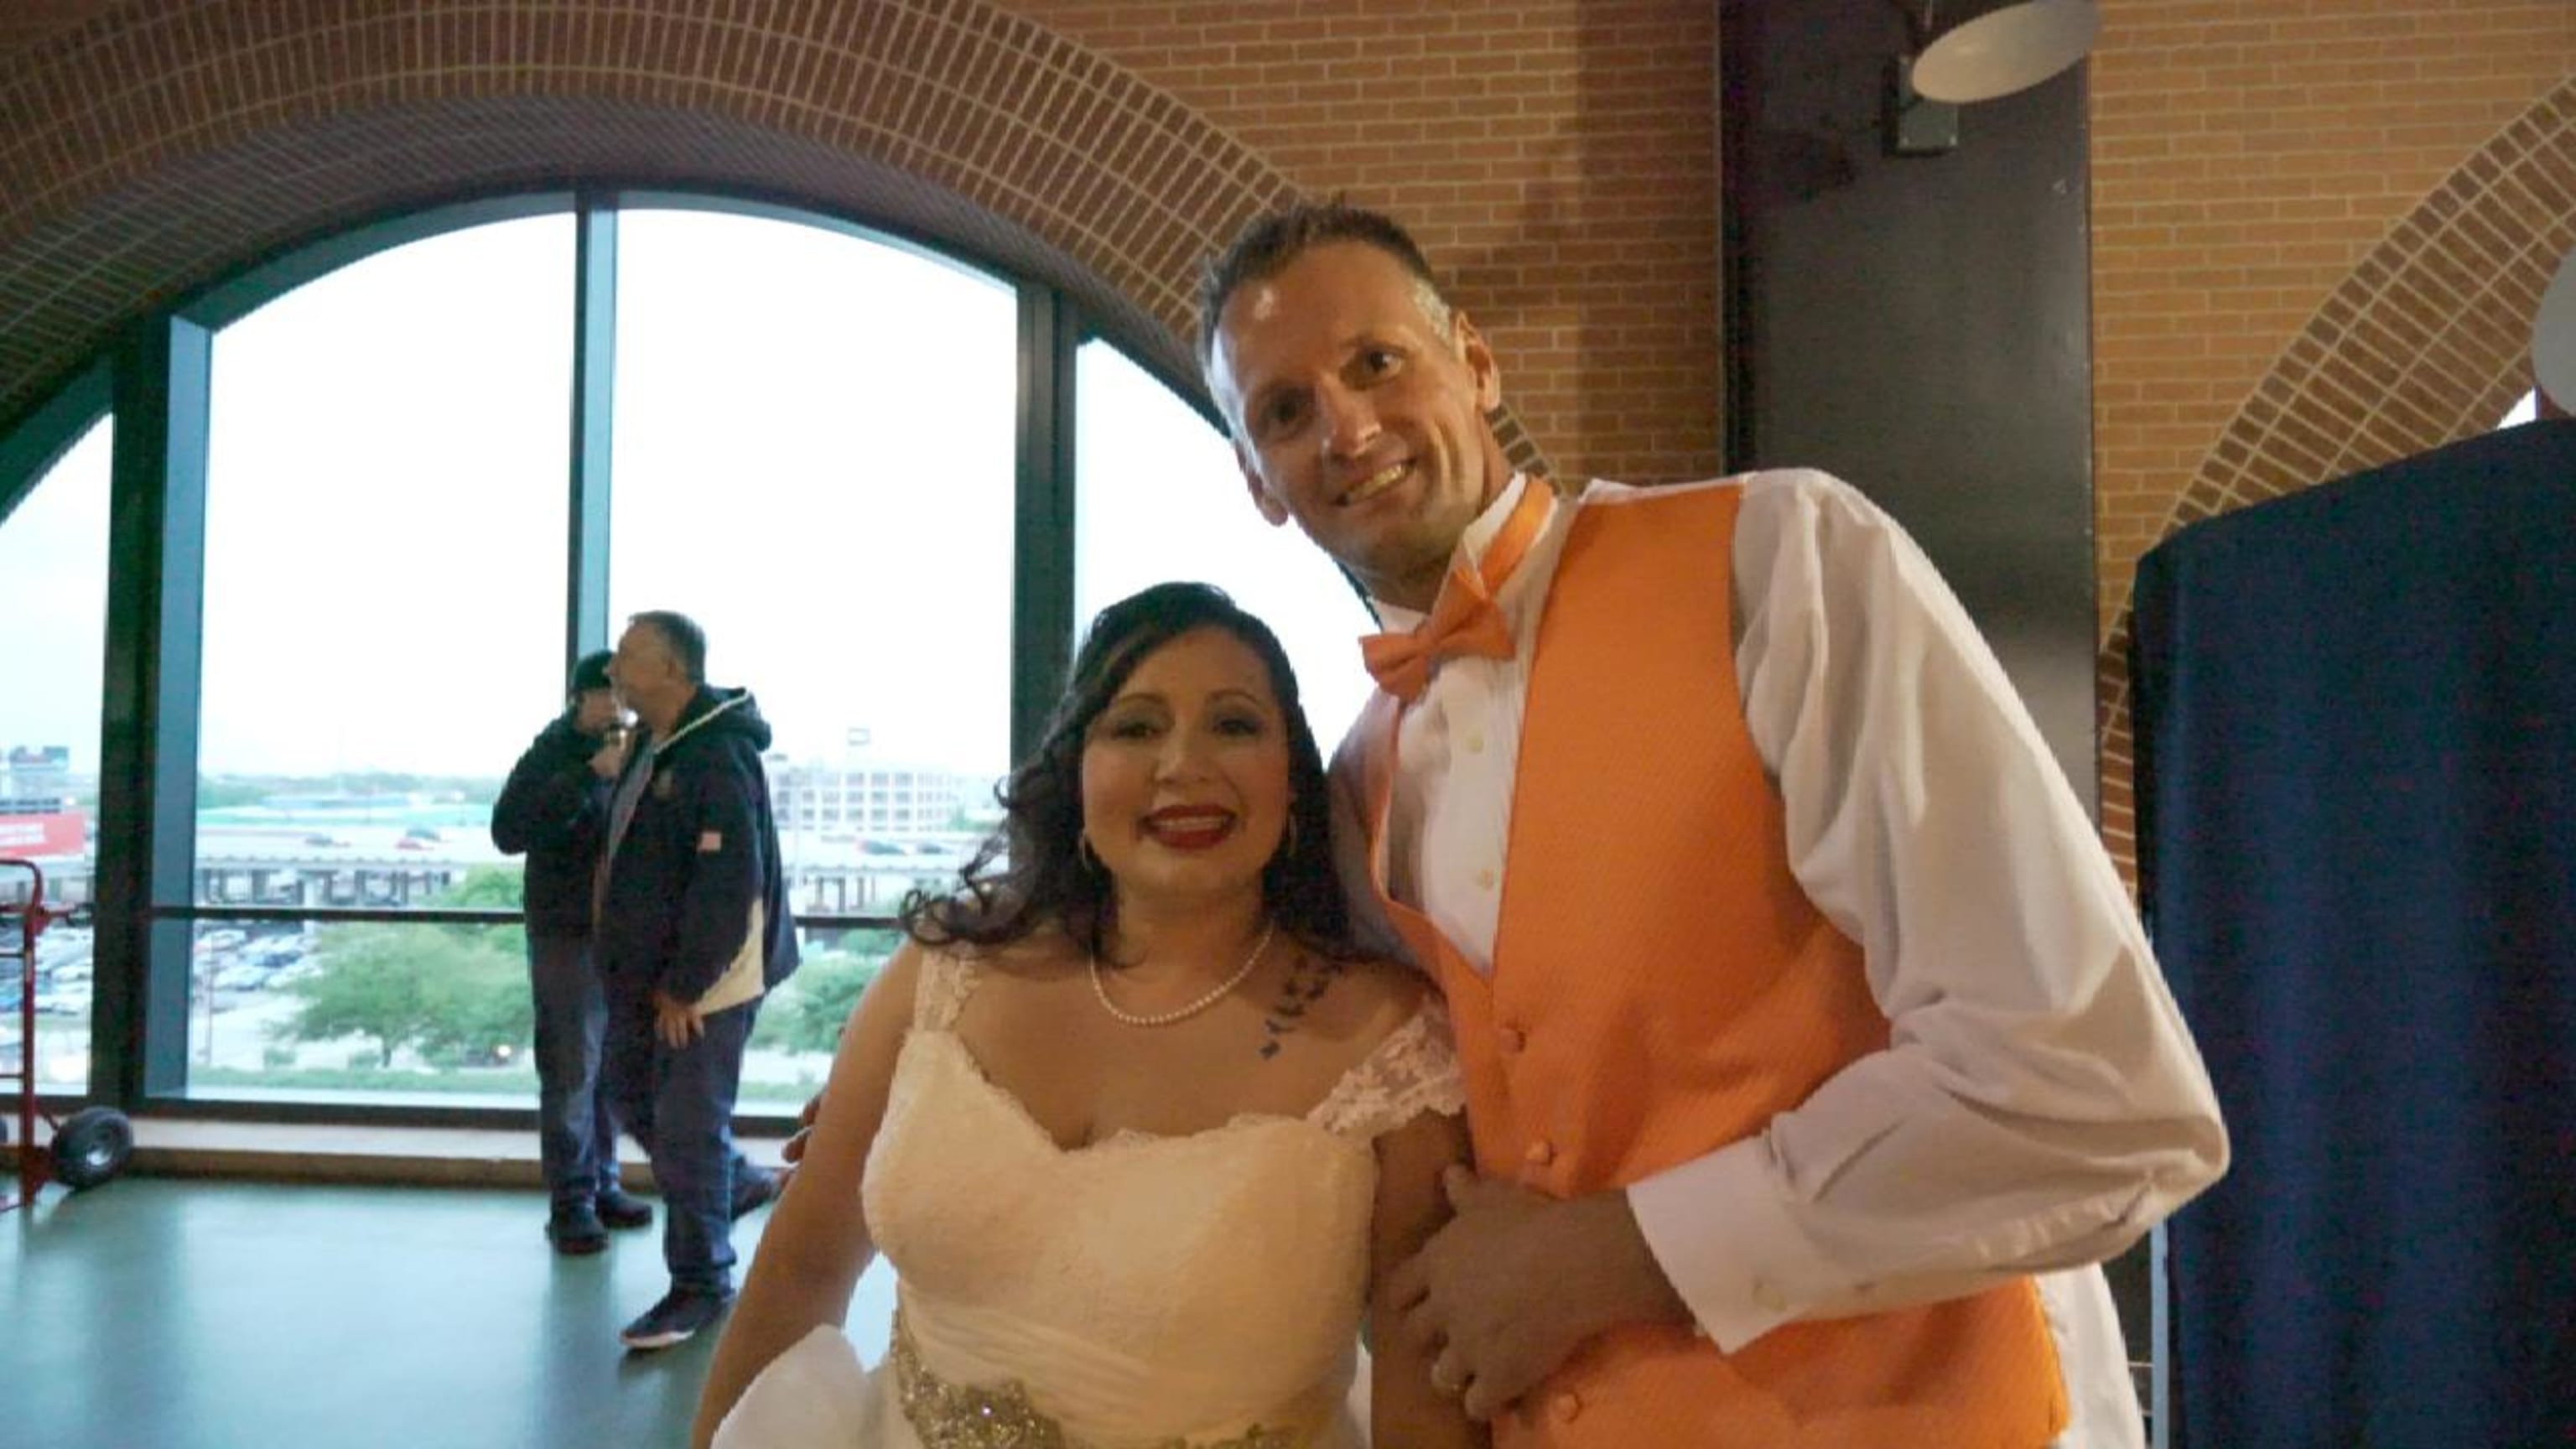 These newlyweds celebrated their marriage with an Astros game and some  nachos